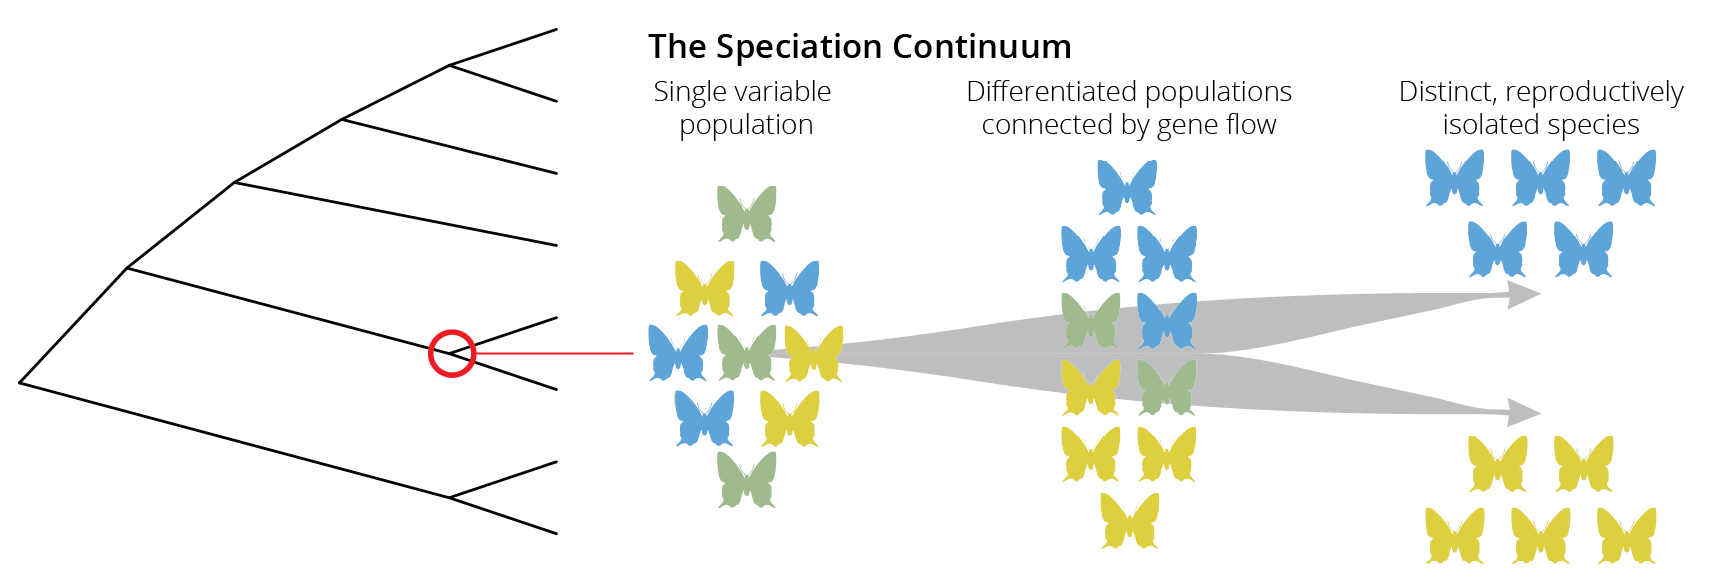 Speciation is not typically an instantaneous process. Rather species evolve gradually along a speciation continuum.